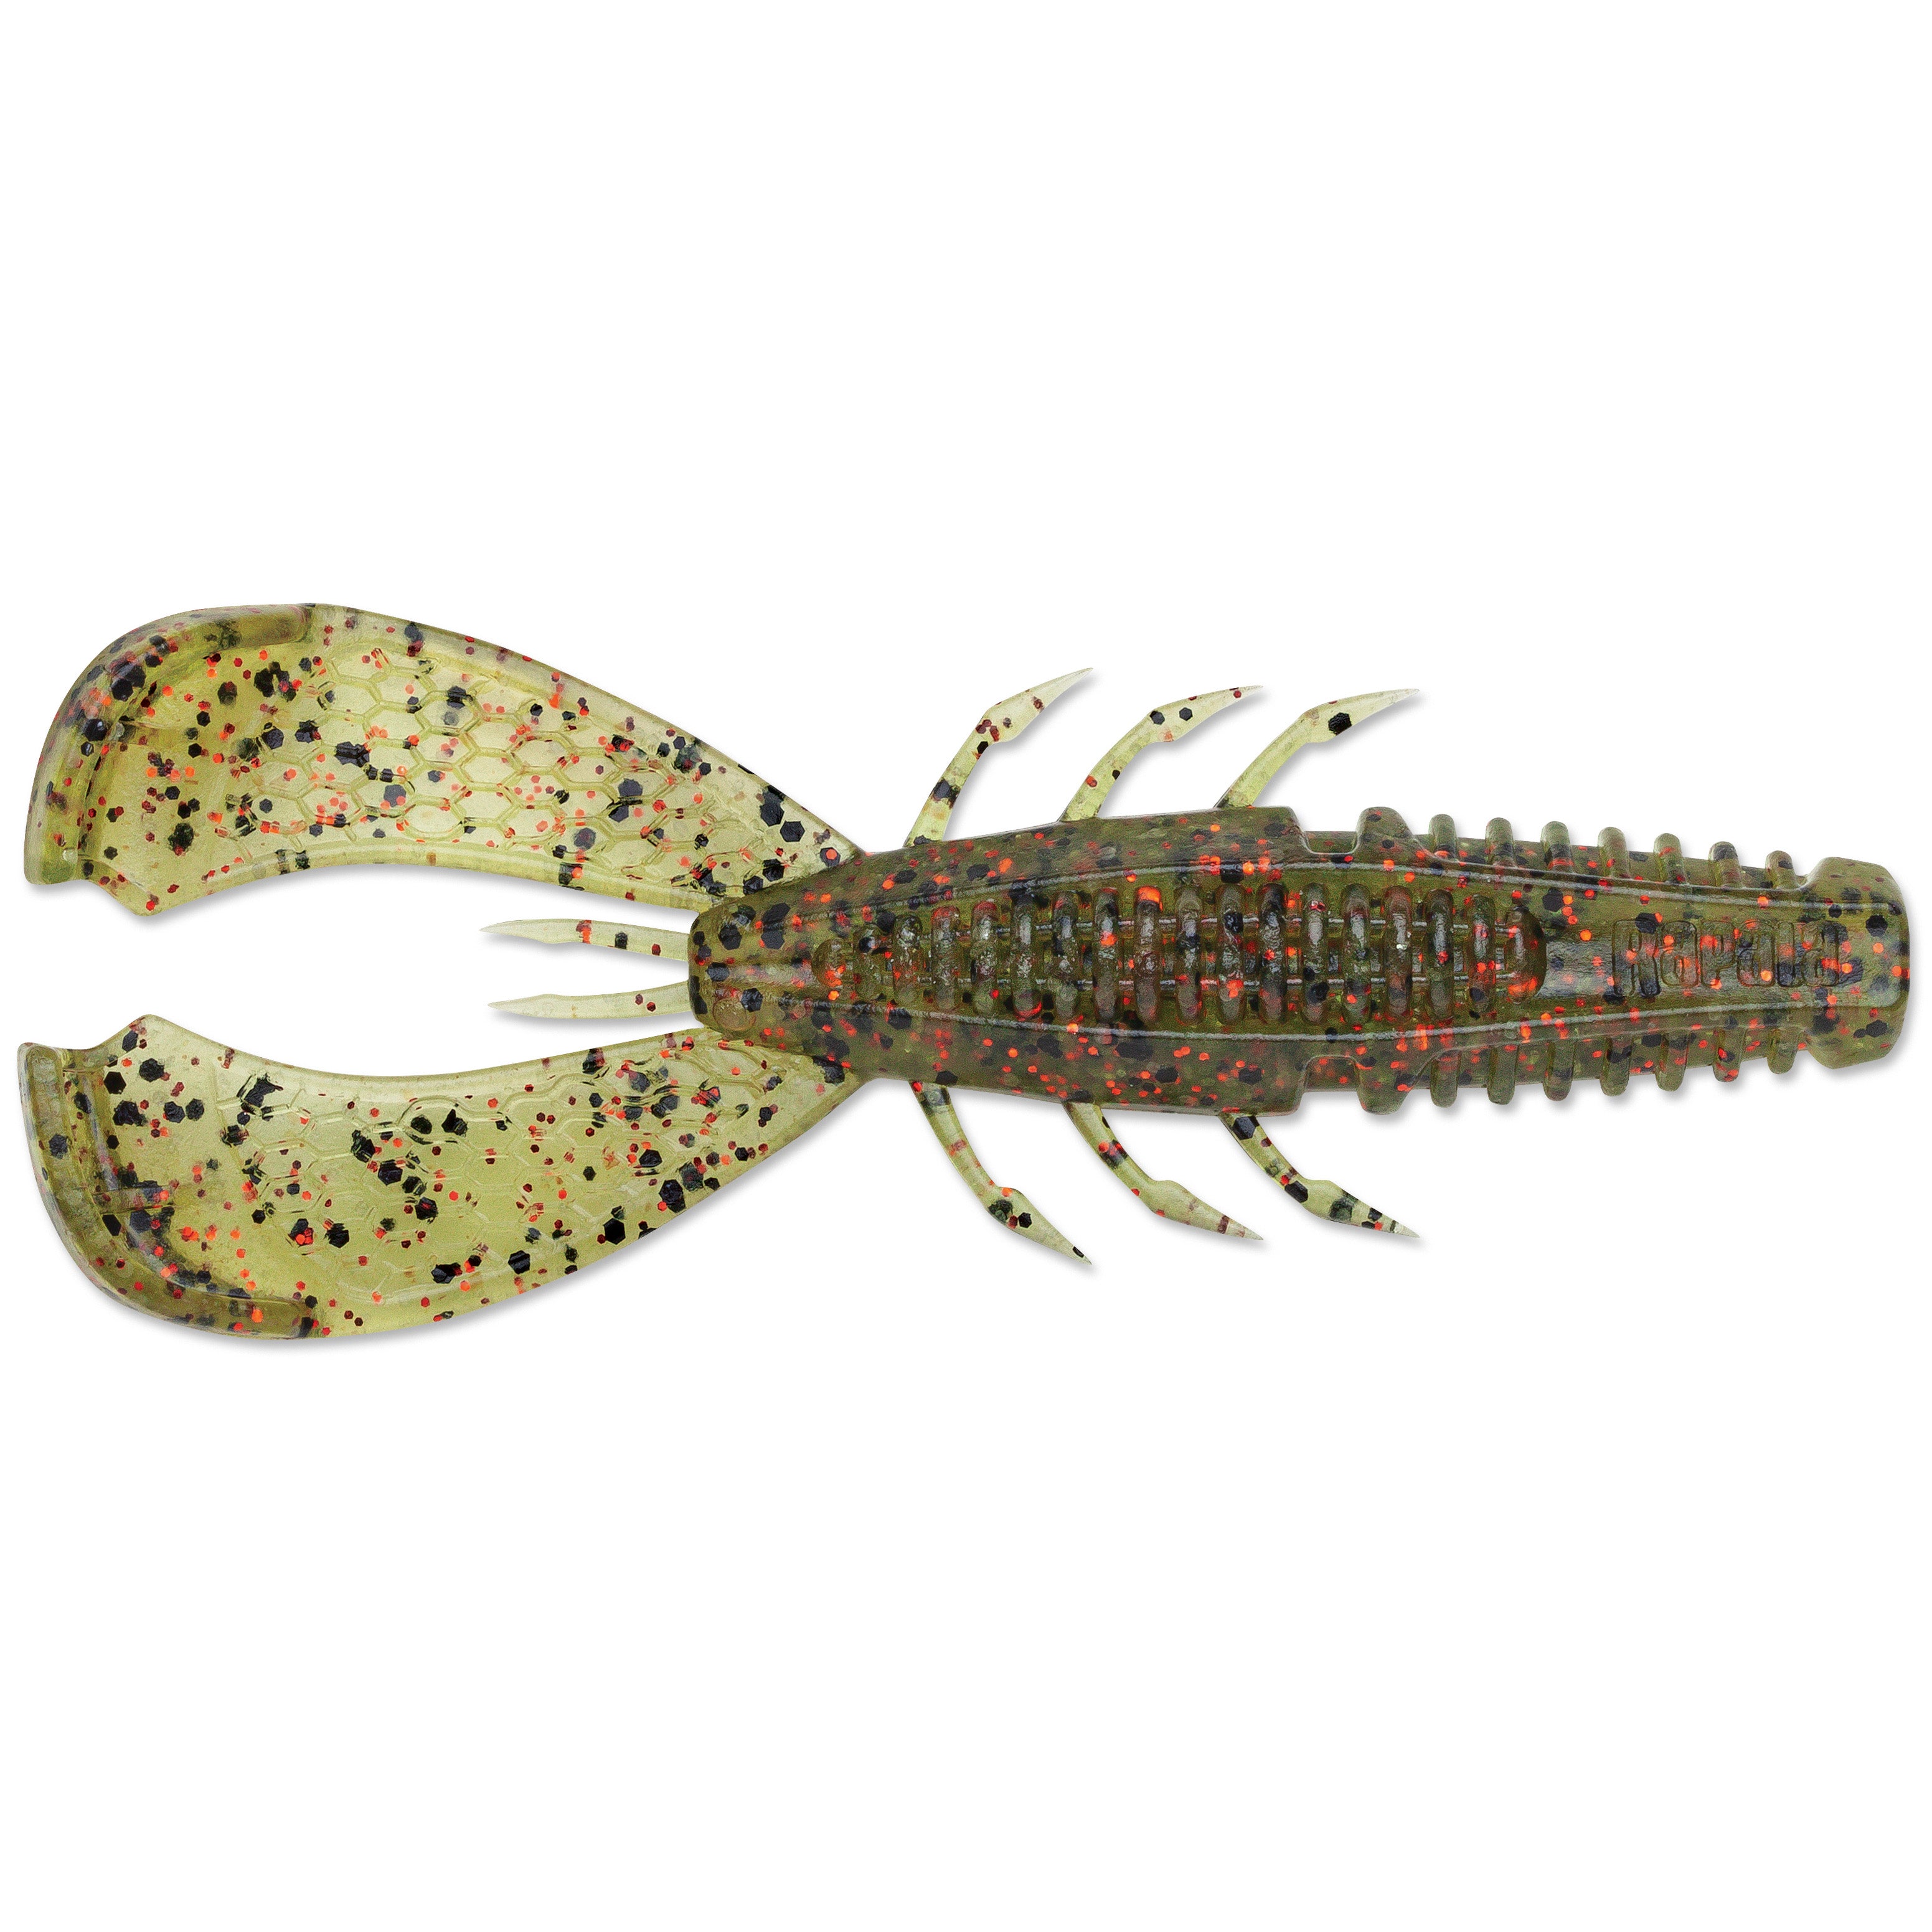 Rapala Crush City Cleanup Craw Watermelon Red